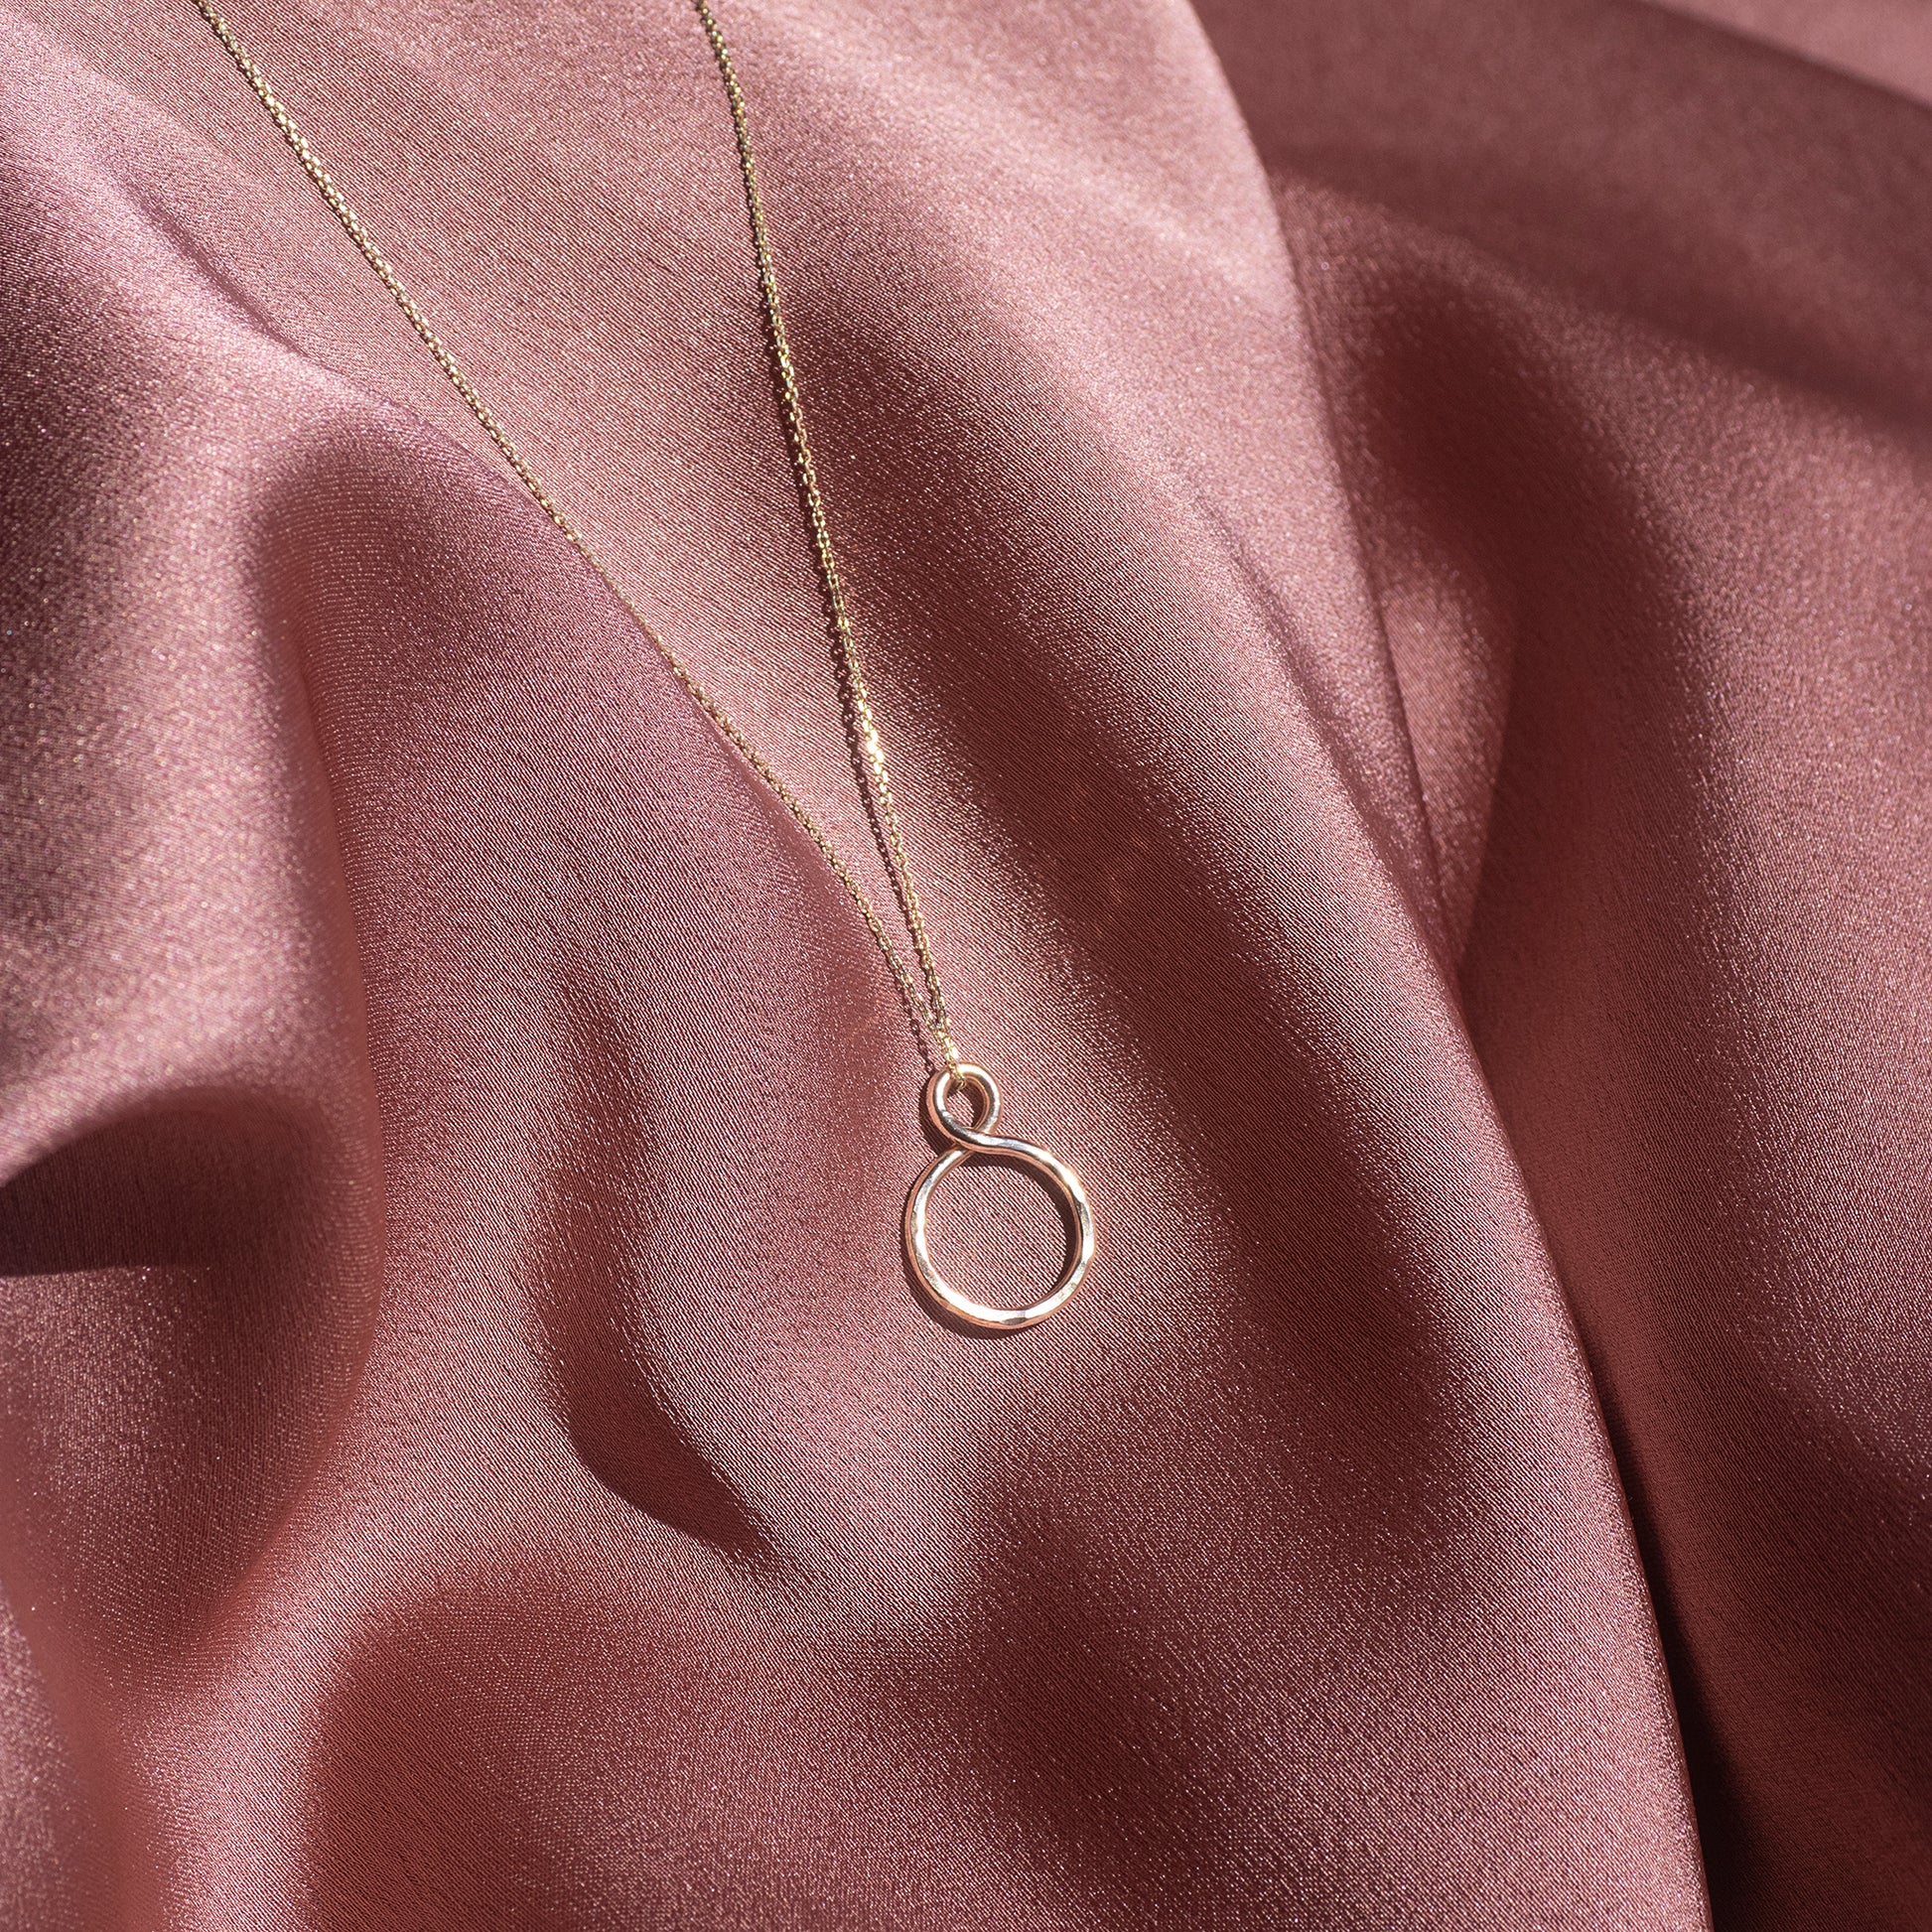 Gift for Granddaughter - Petite Infinity Necklace - 9kt Gold